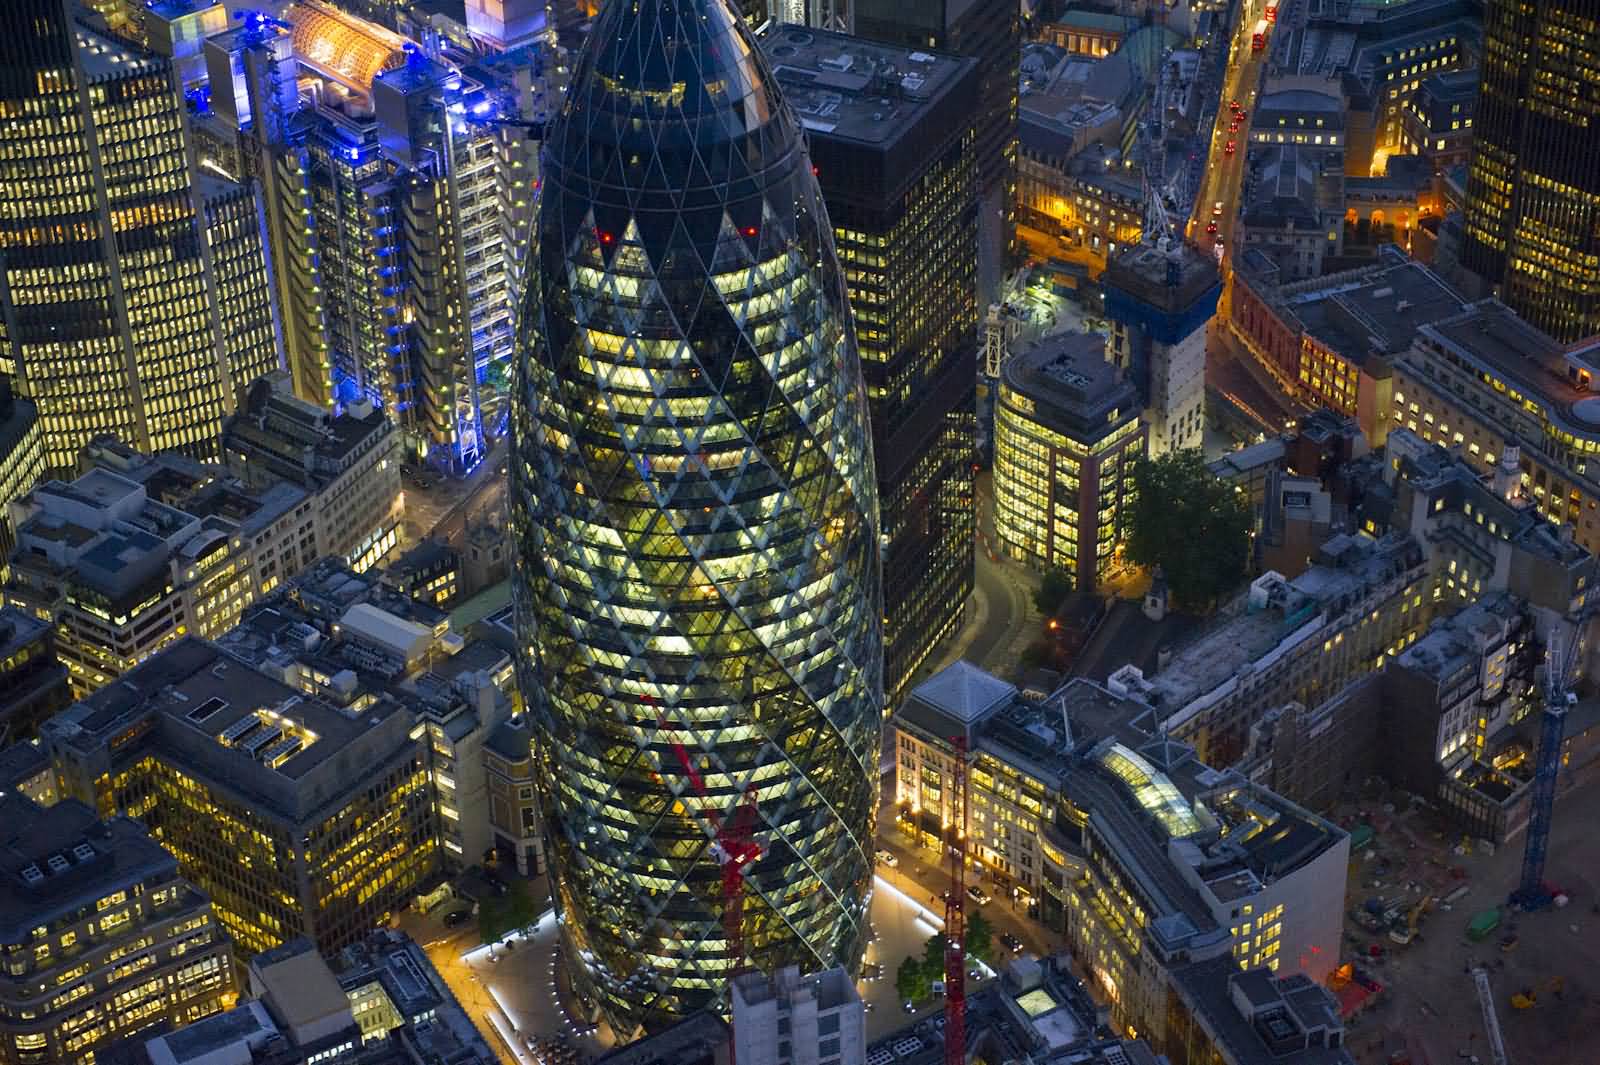 The Gherkin At Night